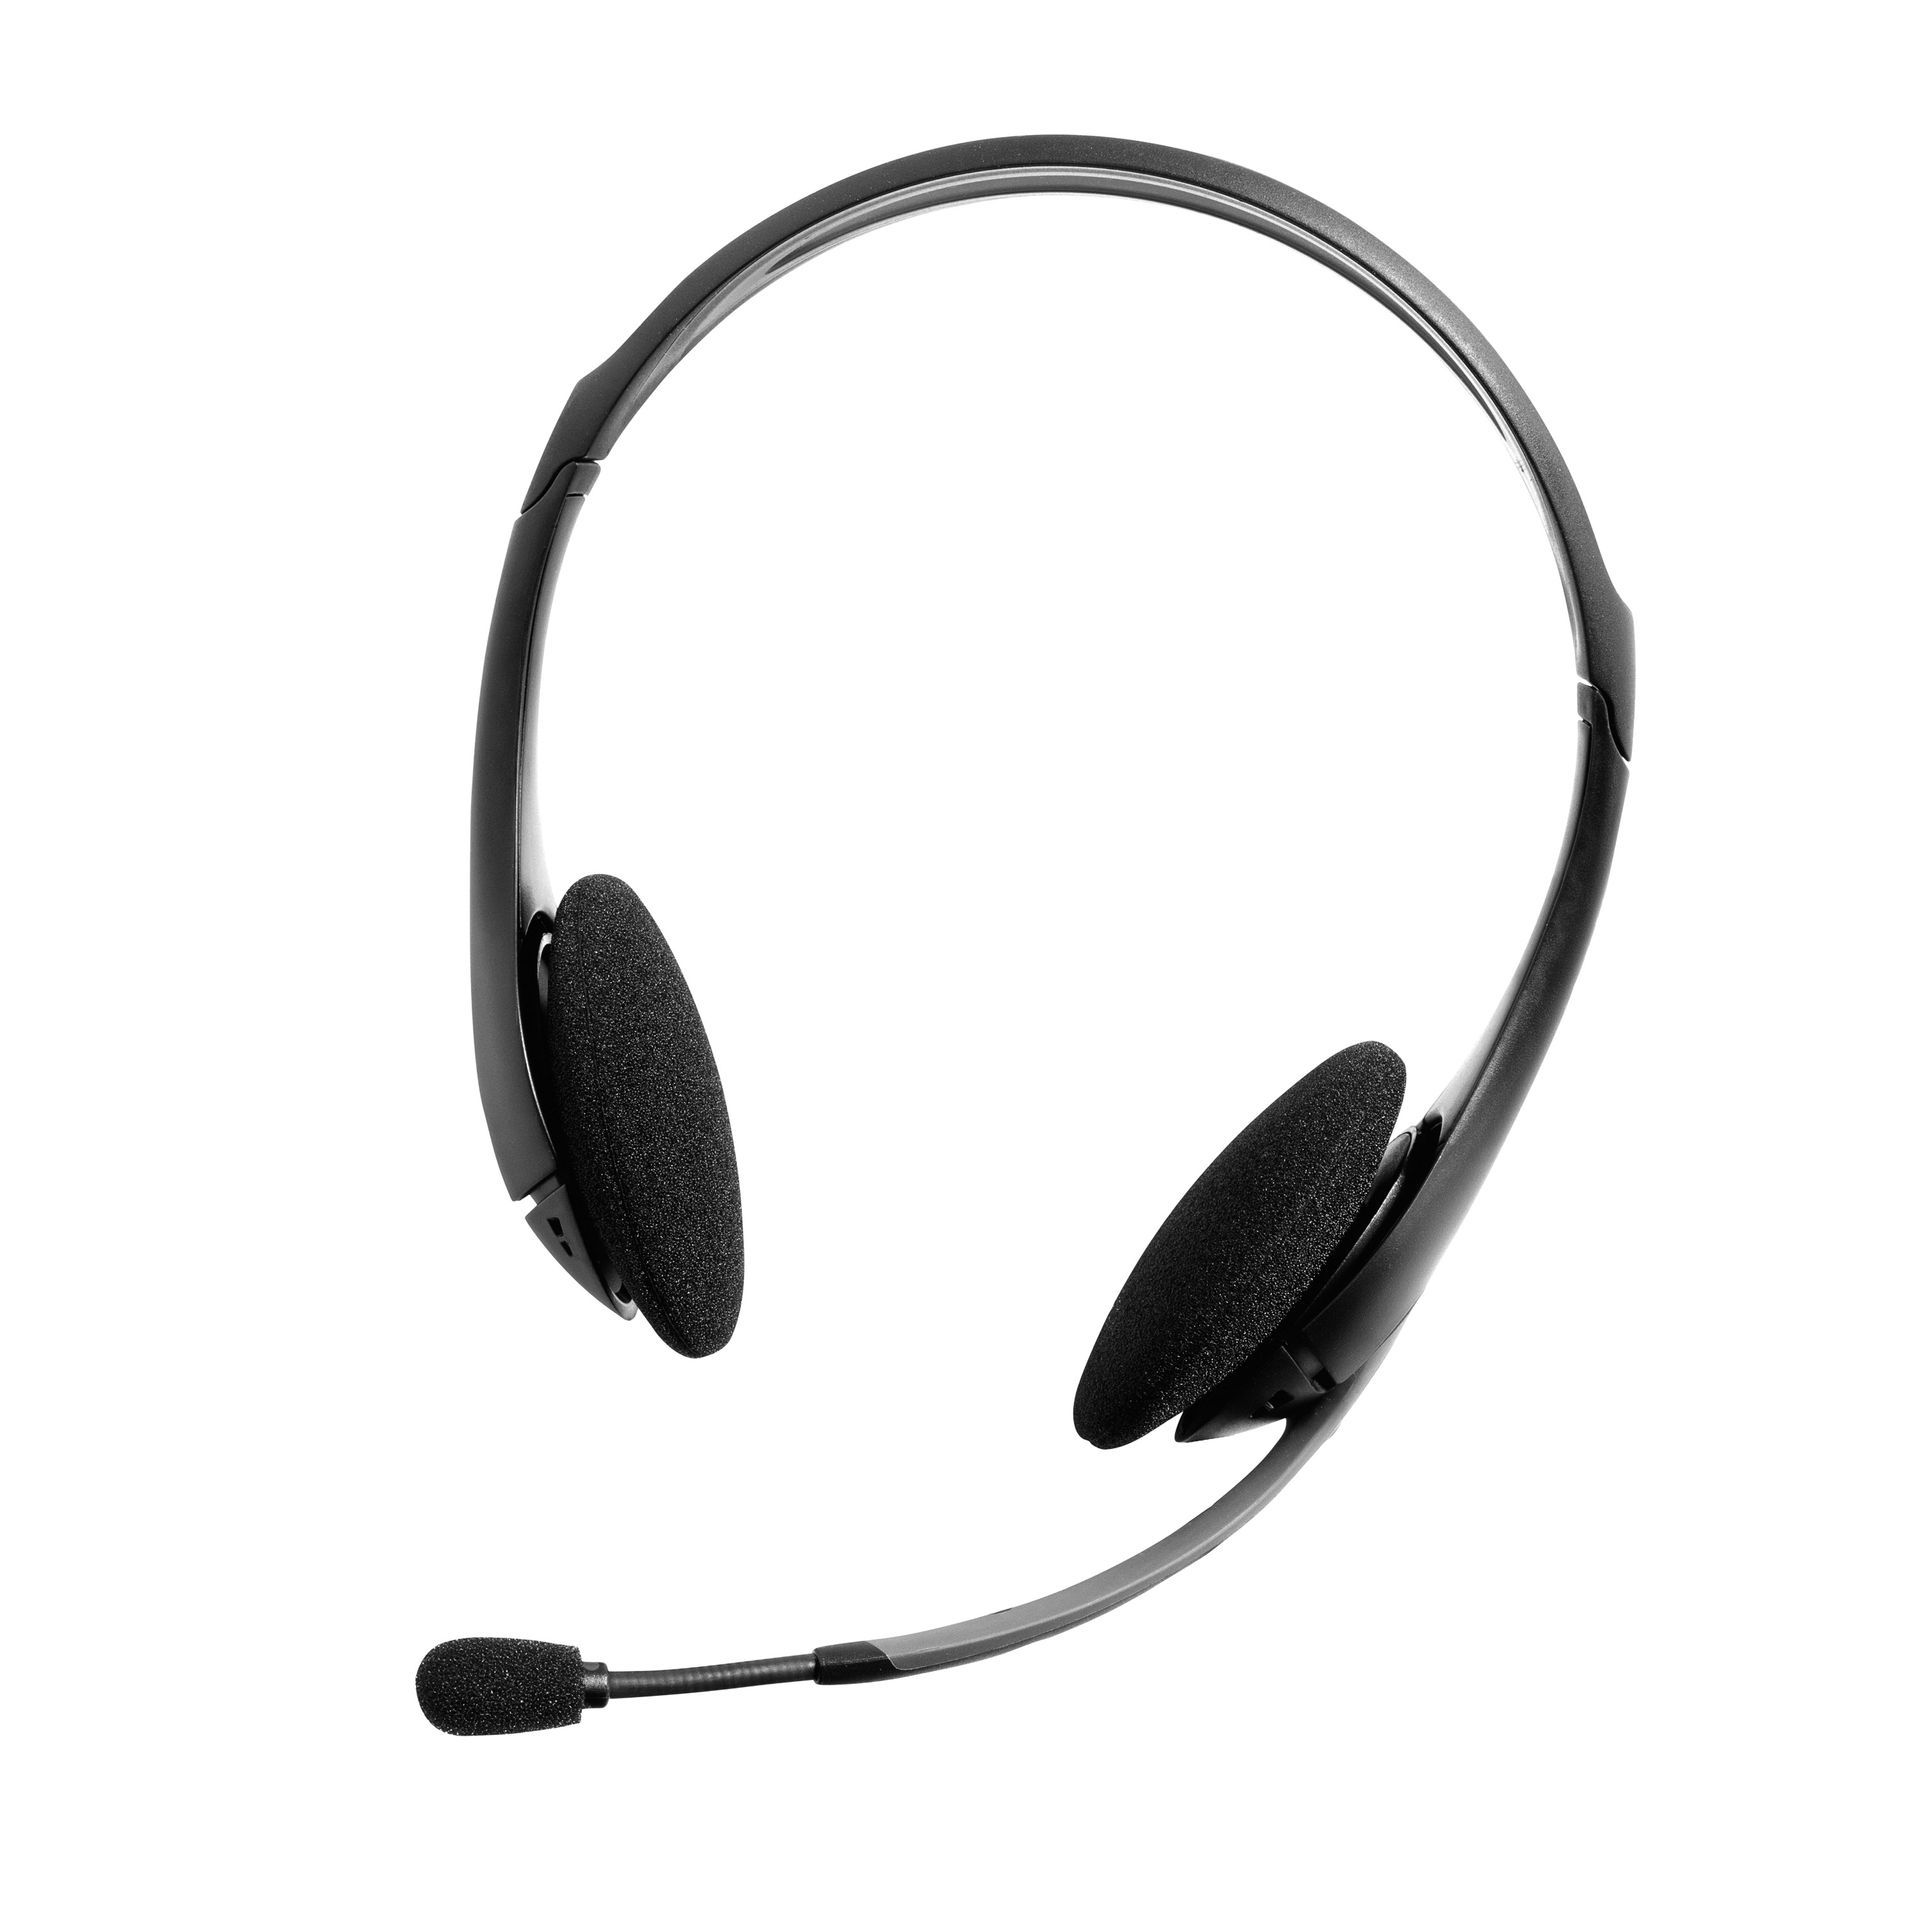 a pair of black headphones with a microphone on a white background